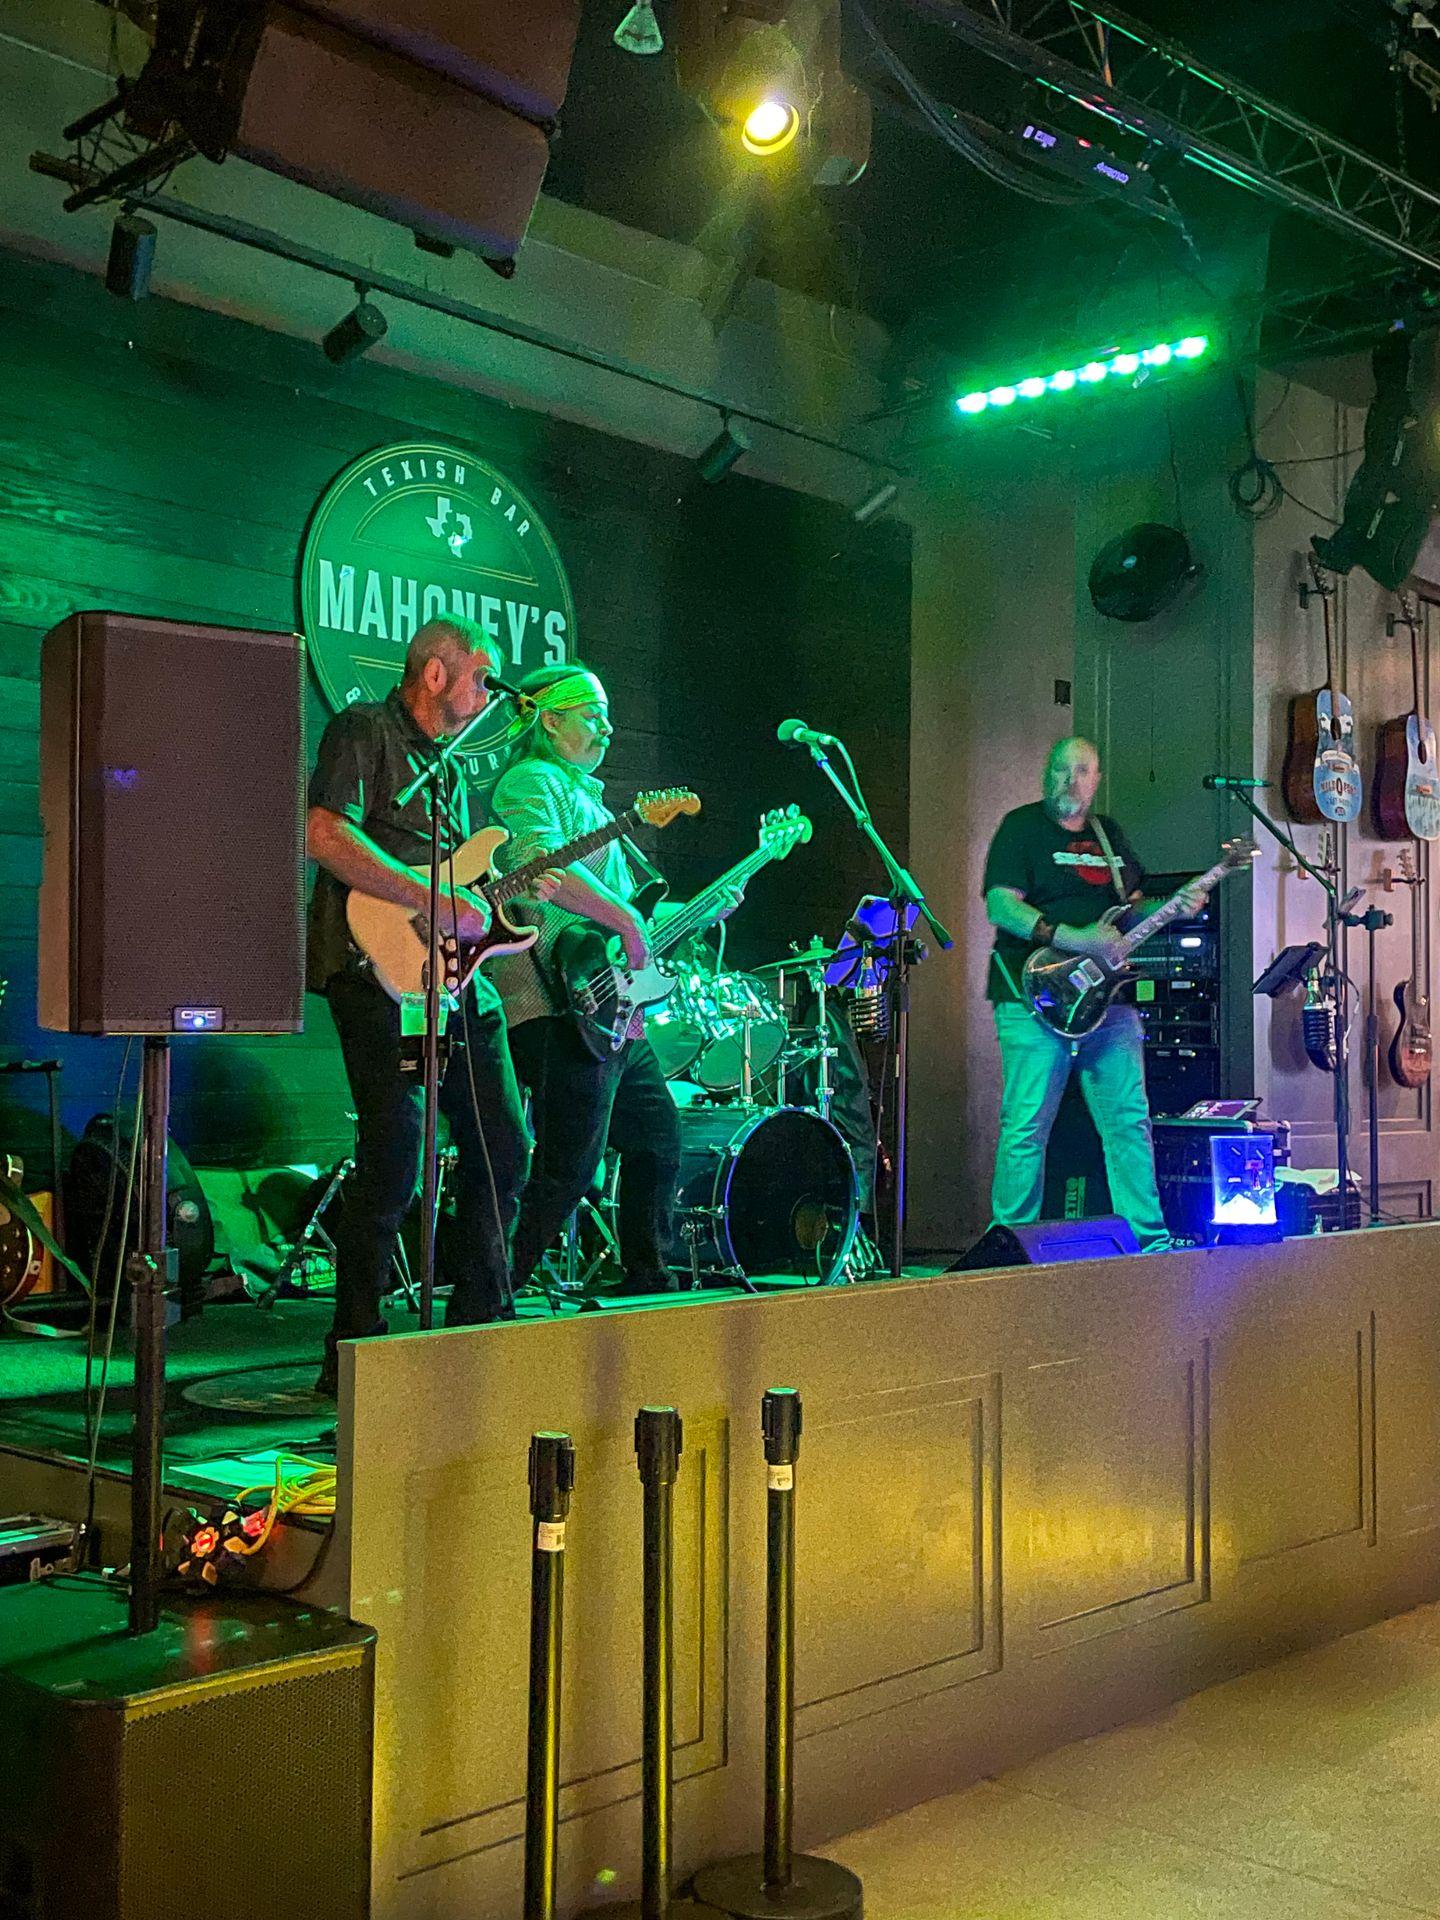 Side Project X performing at Mahoney's